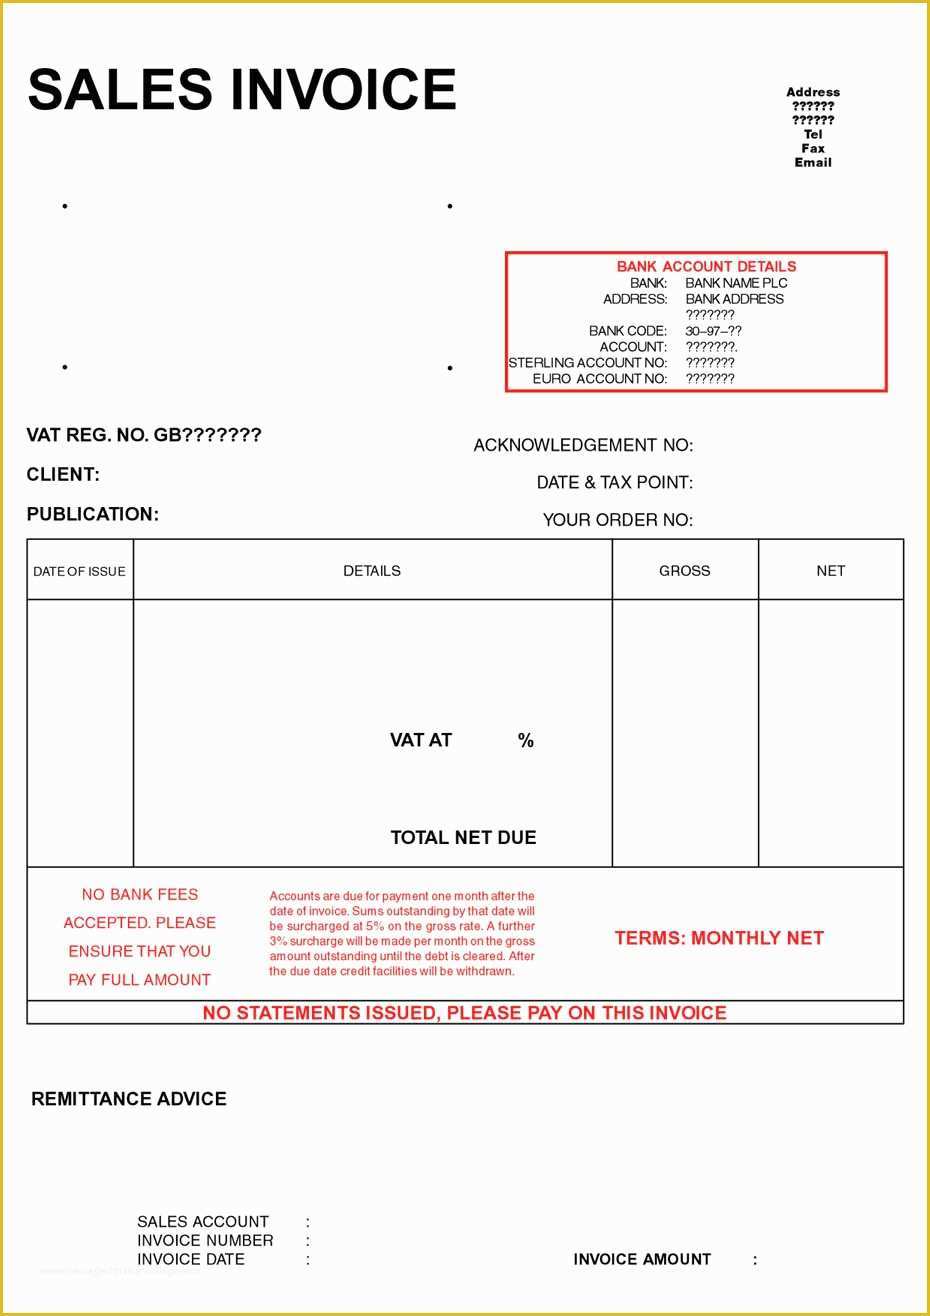 Free Company Invoice Template Of Business Business Invoice Template Business Invoice Template